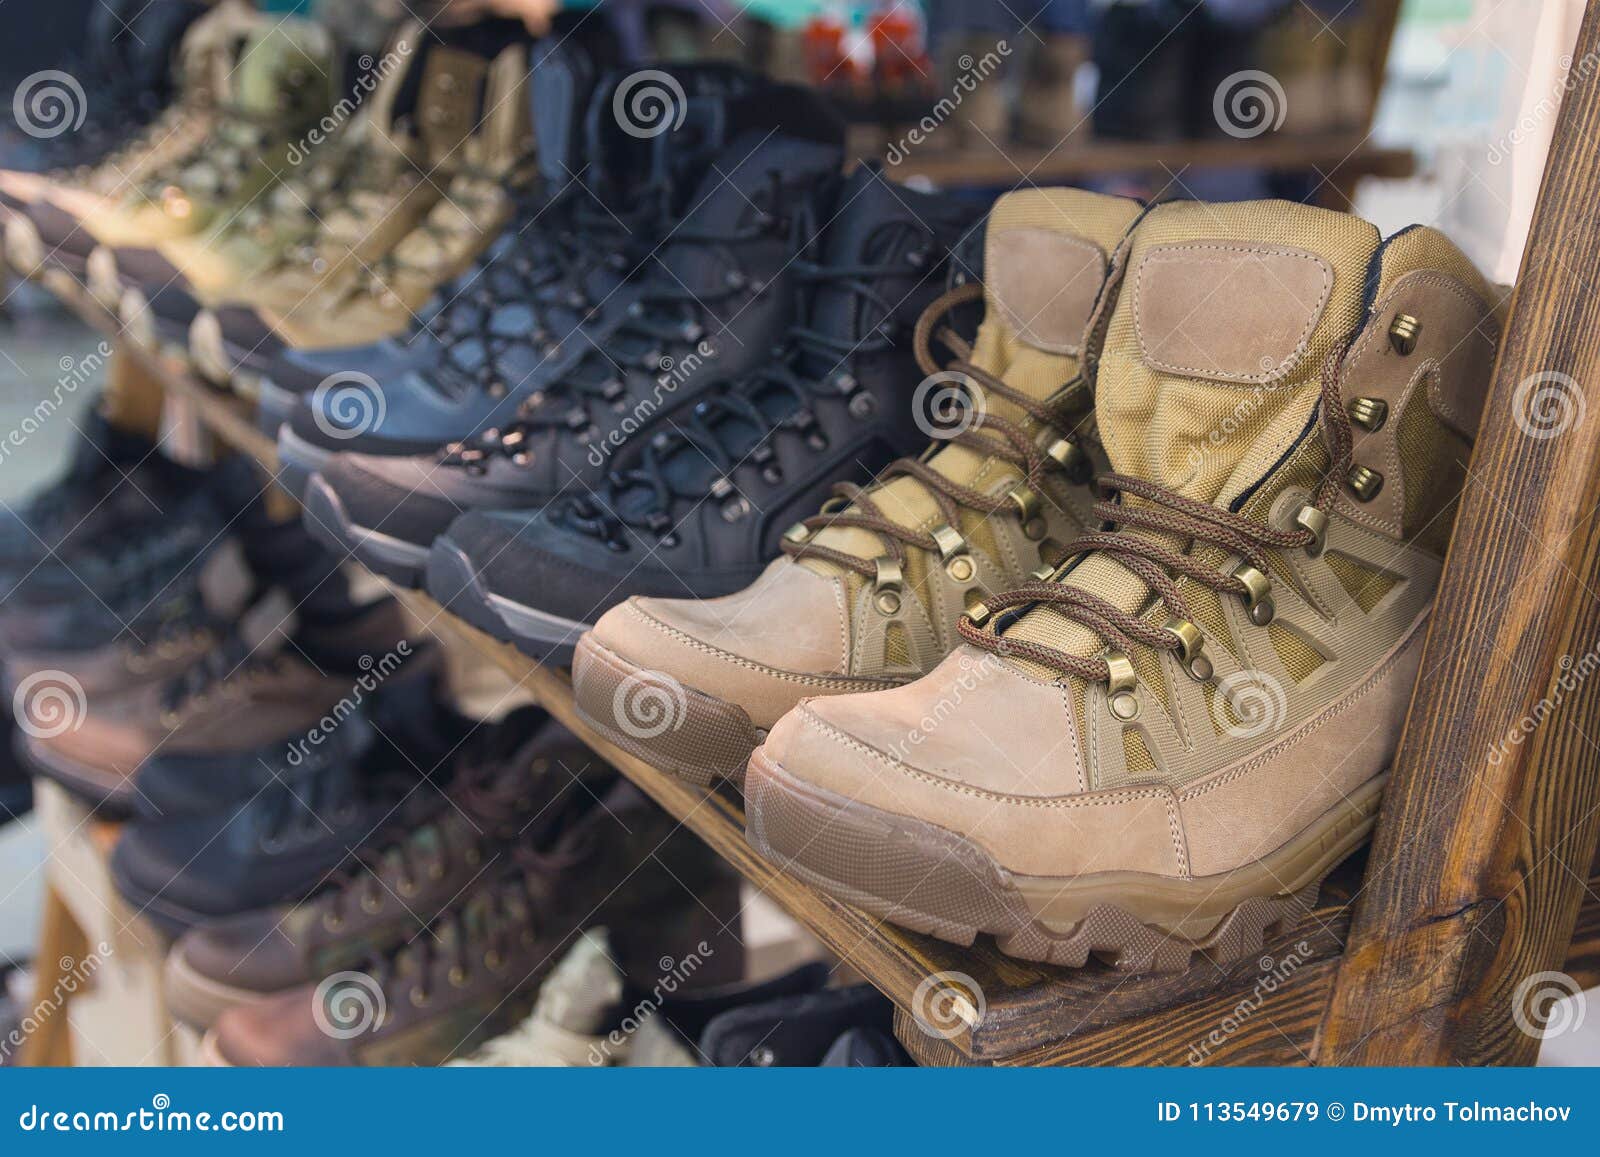 Army Boots Are In Line At The Store 